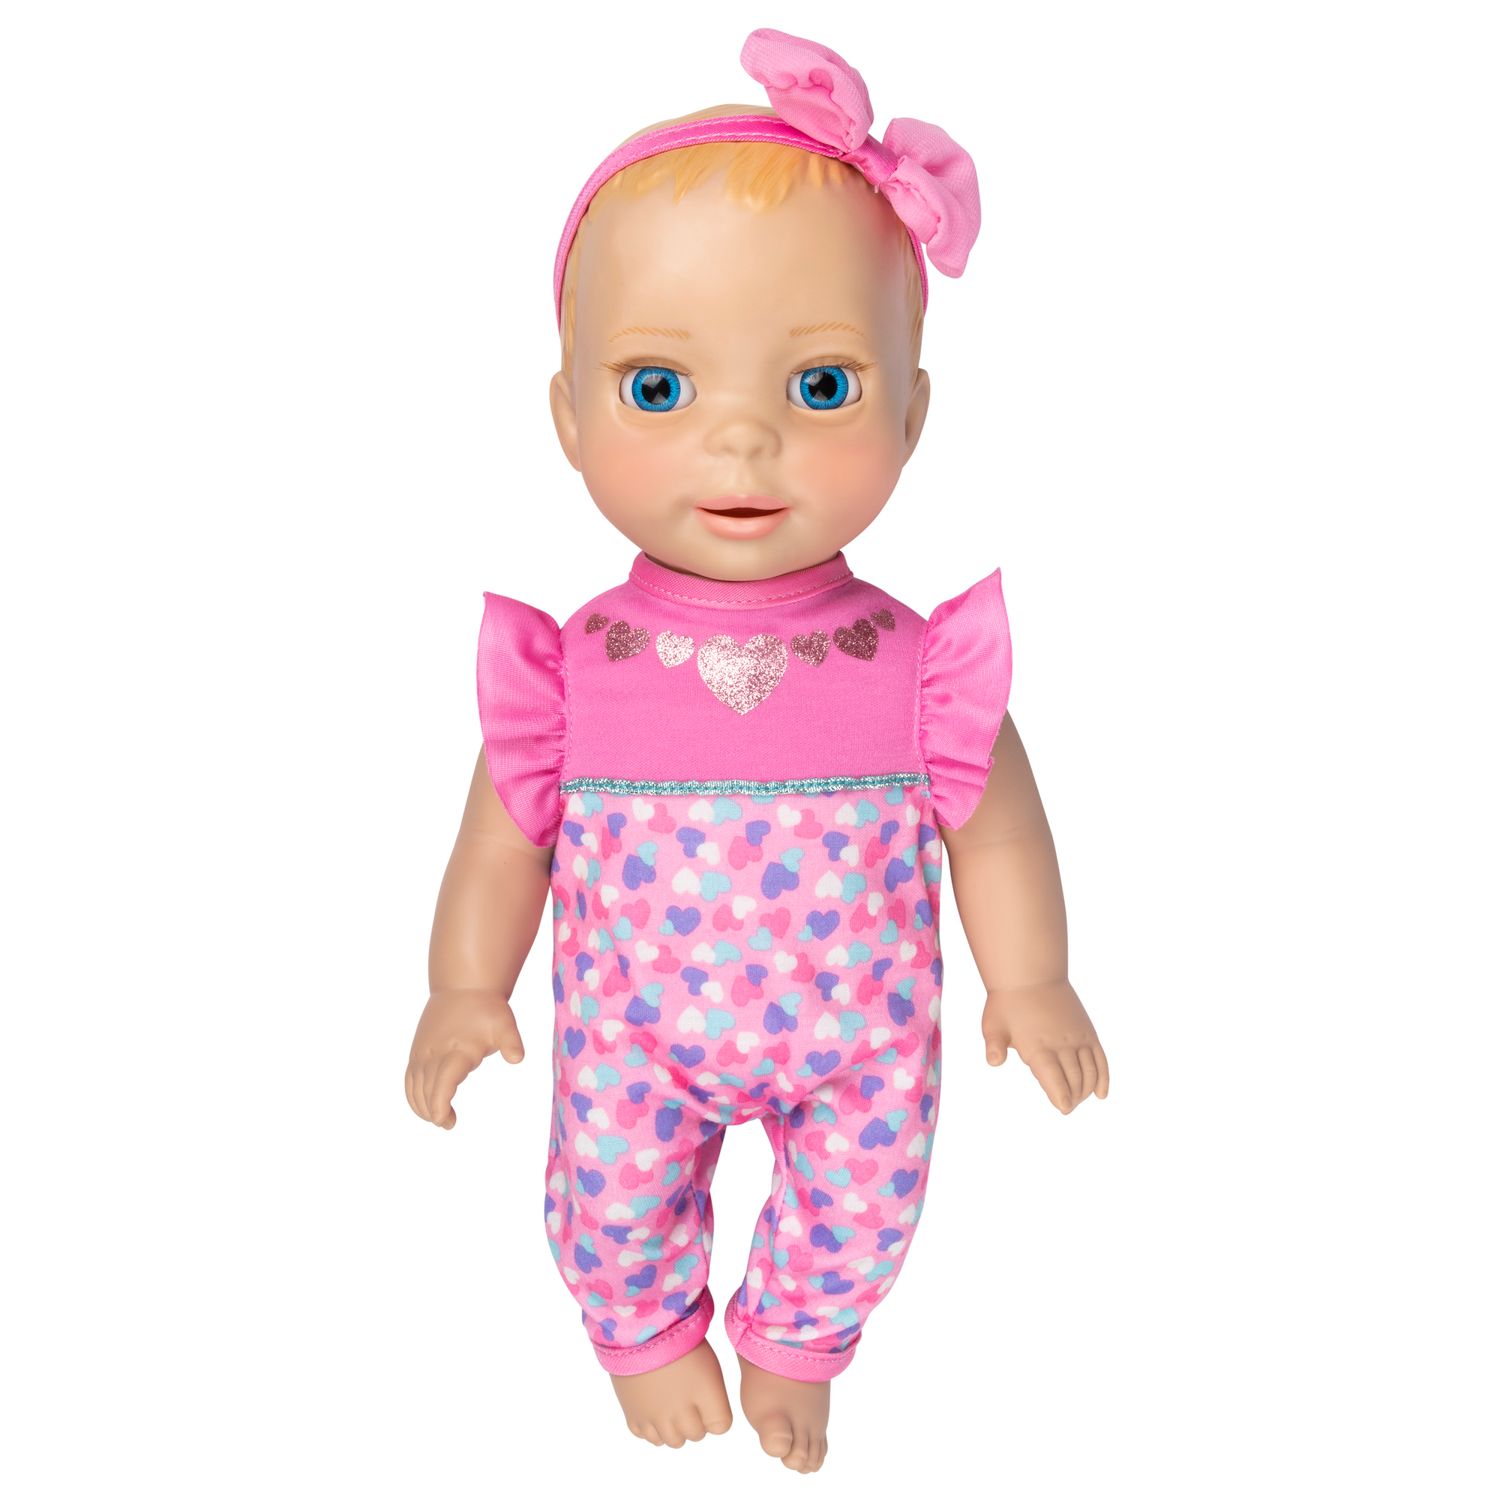 baby alive real as can be kohls